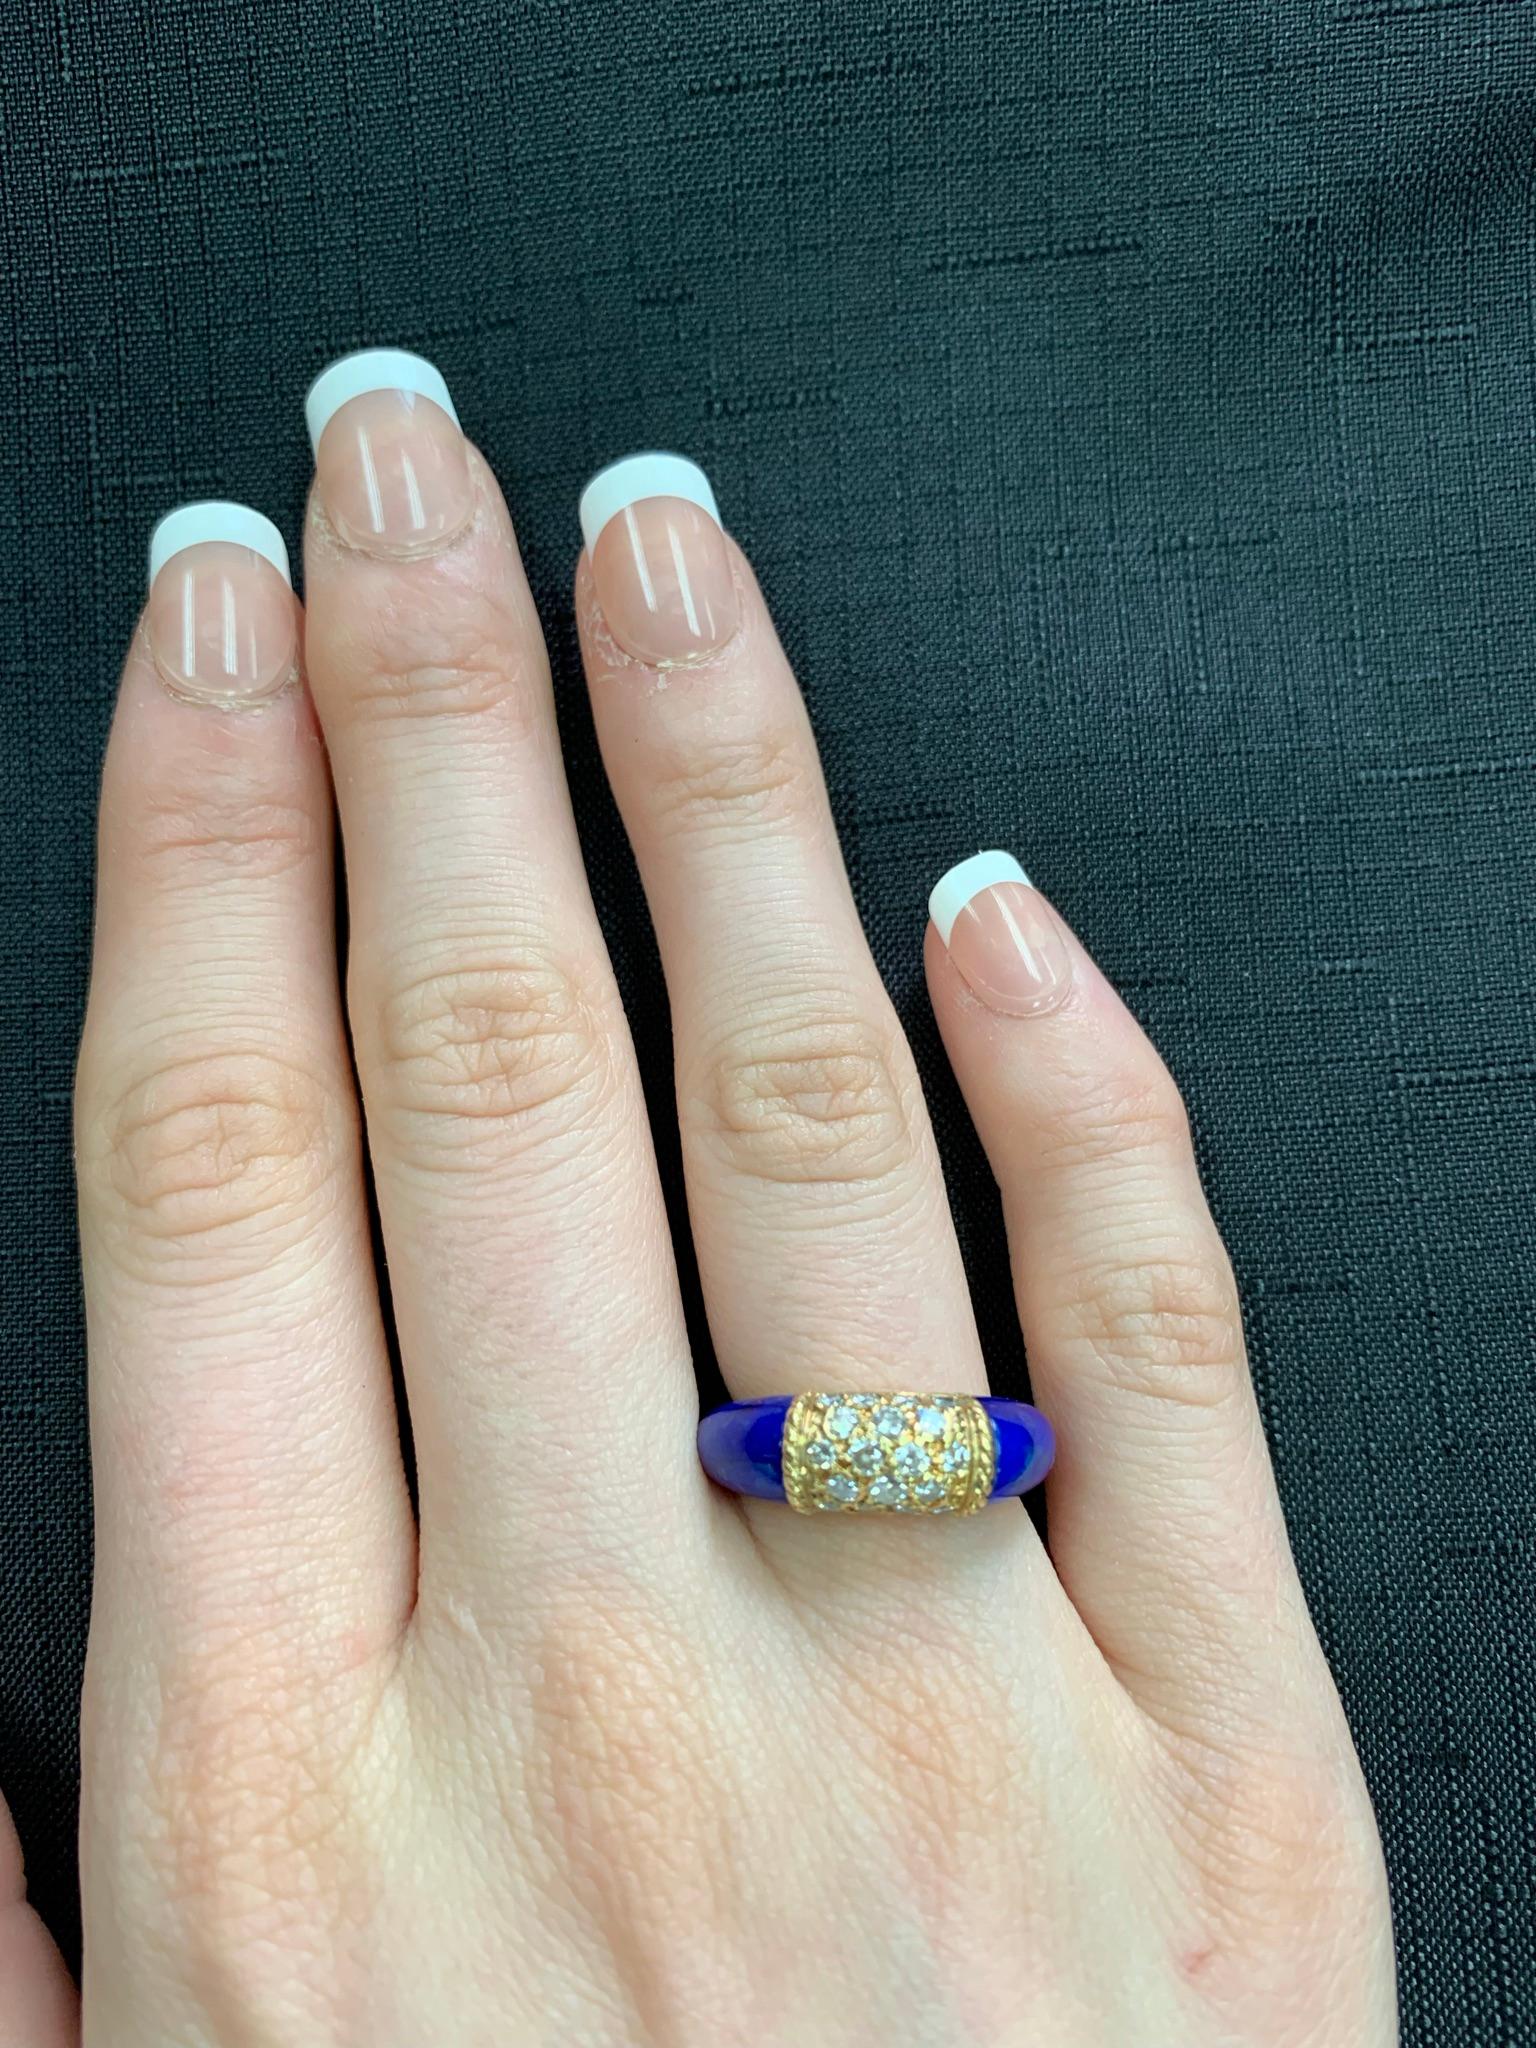 Van Cleef & Arpels Lapis and 5 Row Diamond Stacking Philippine Ring, 18K Yellow In Excellent Condition For Sale In New York, NY